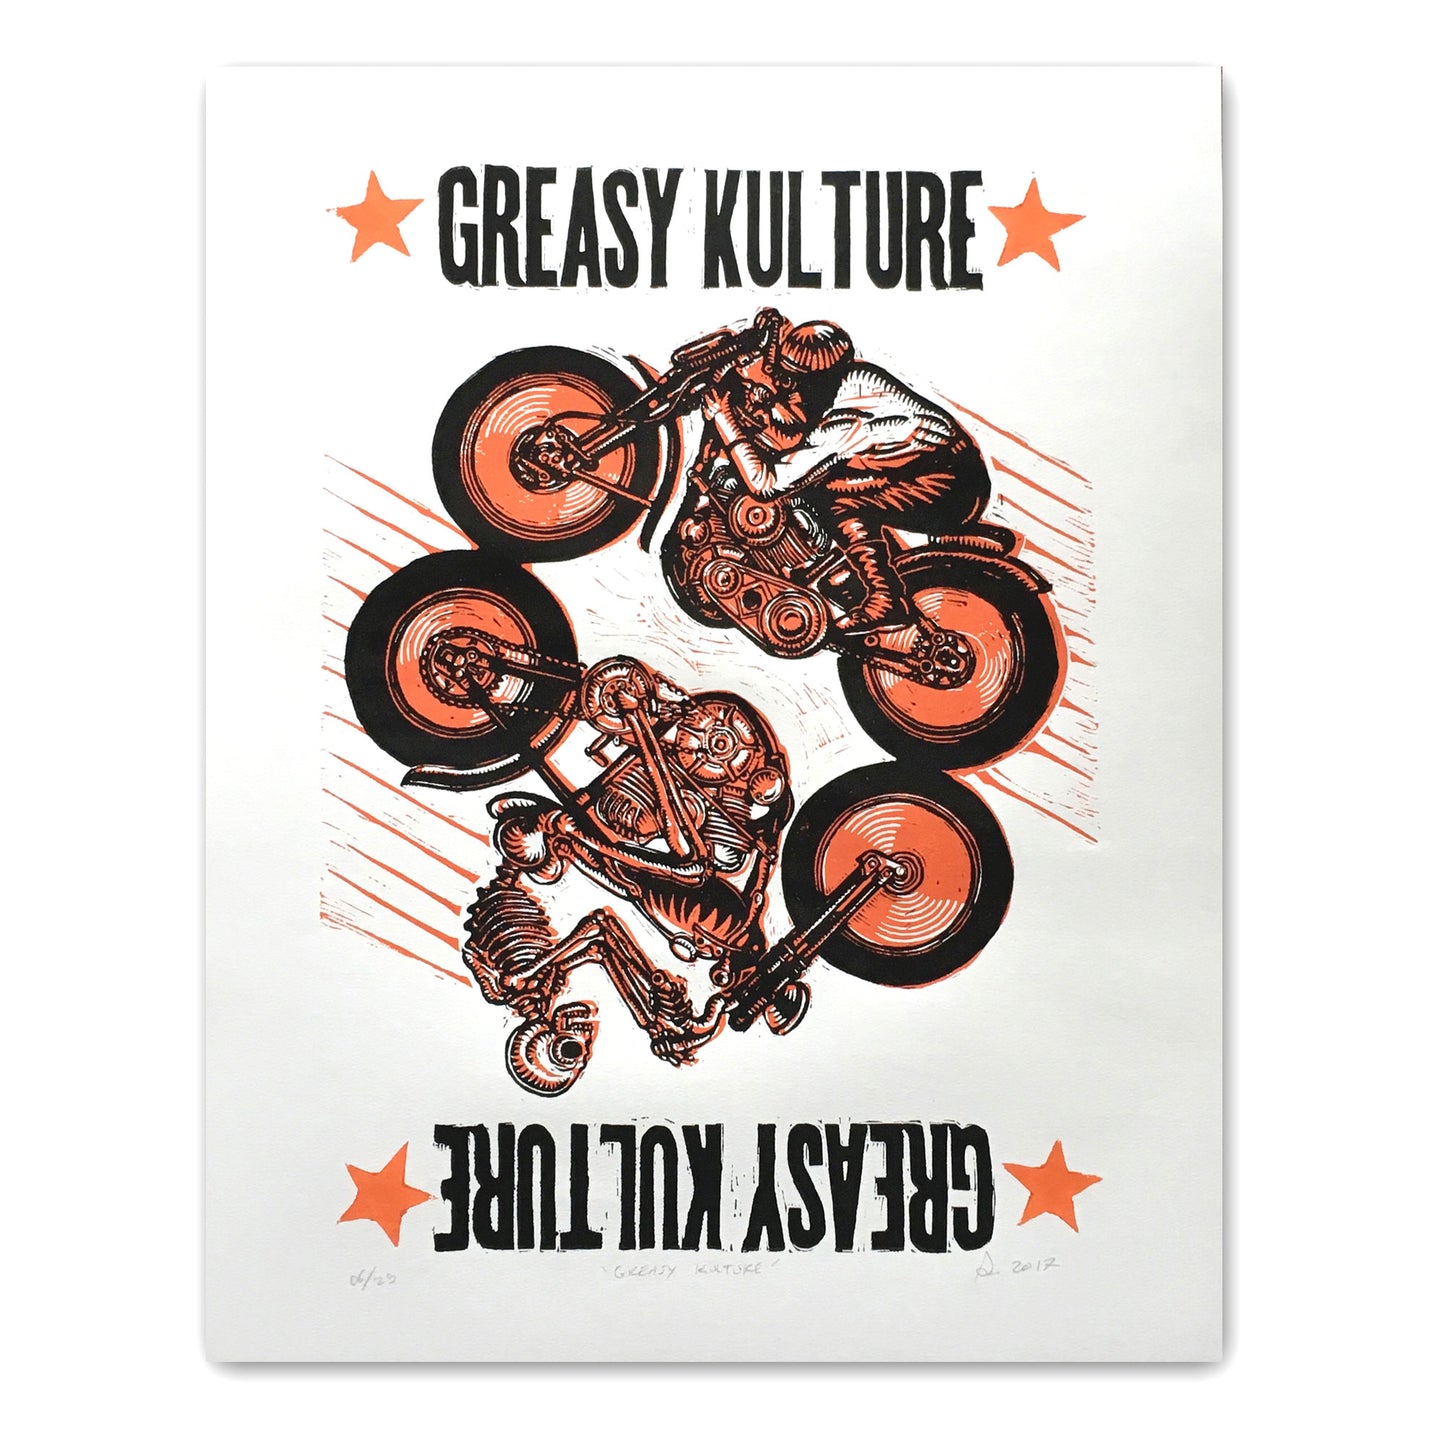 Greasy Kulture poster